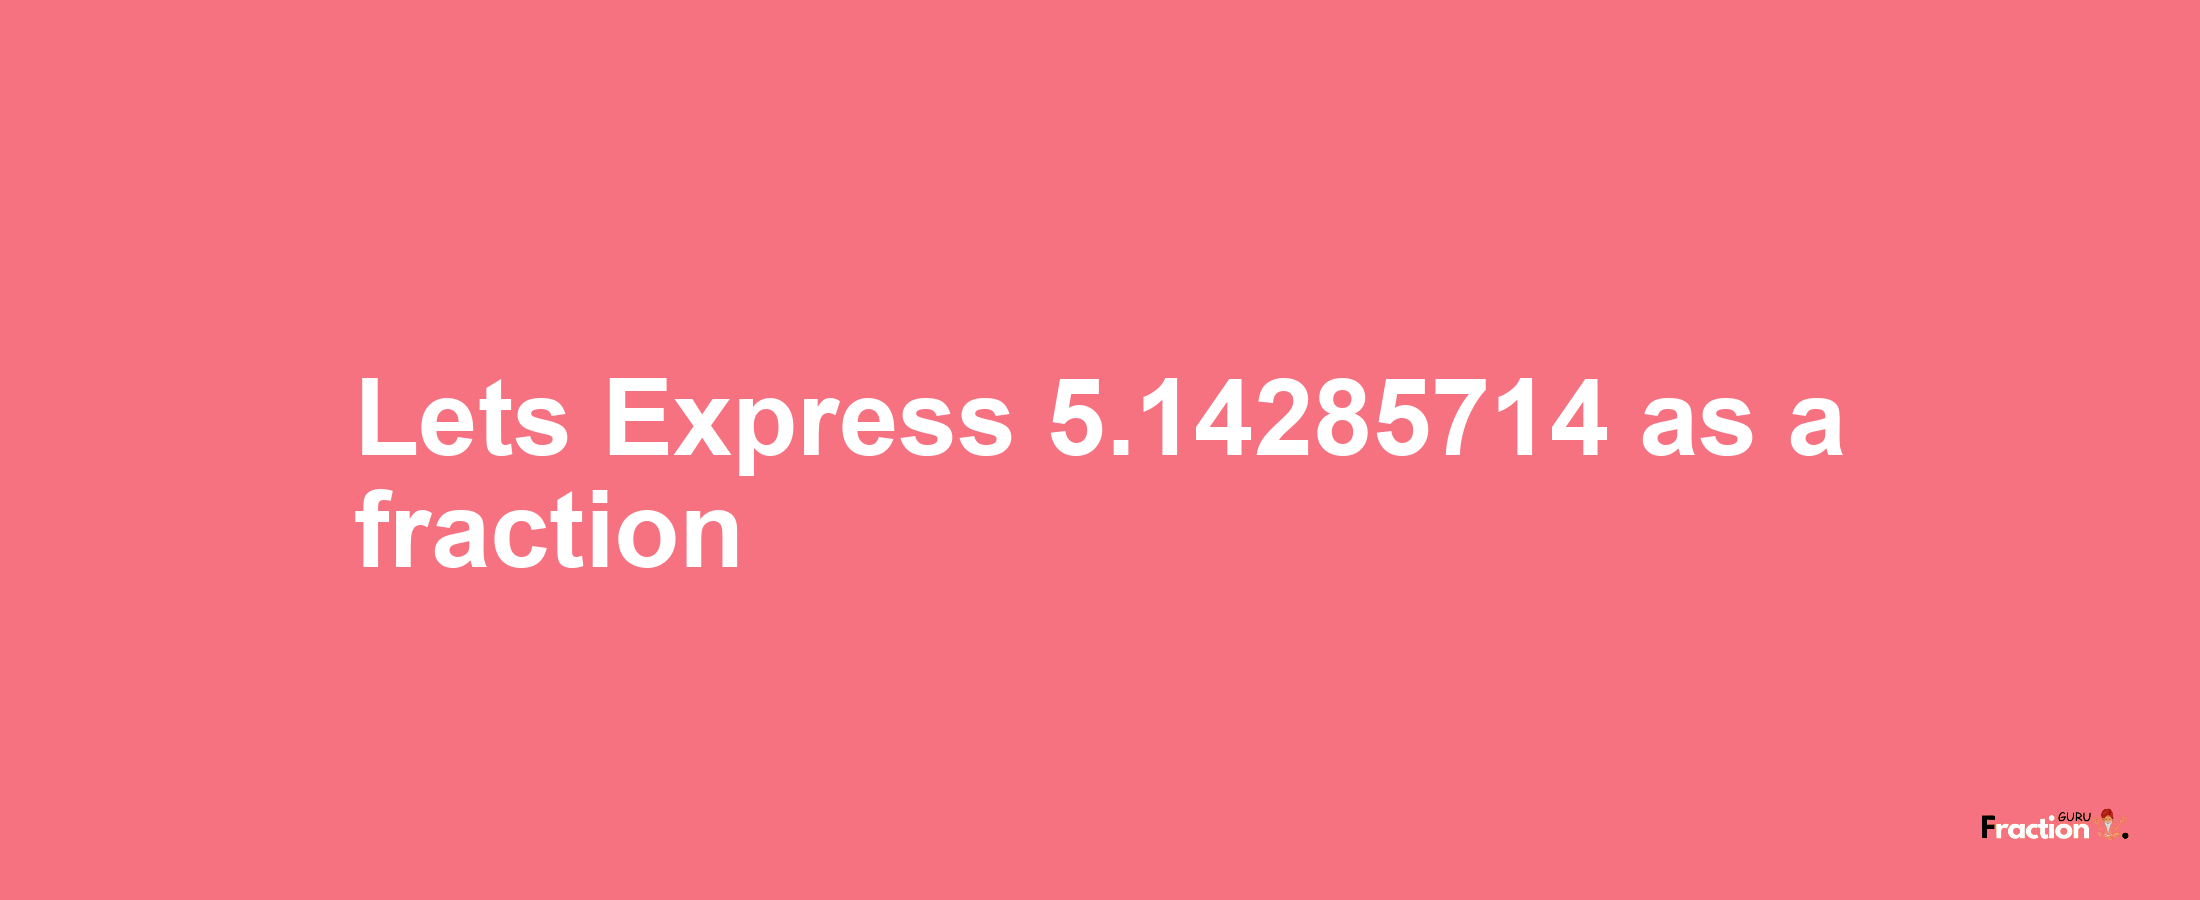 Lets Express 5.14285714 as afraction